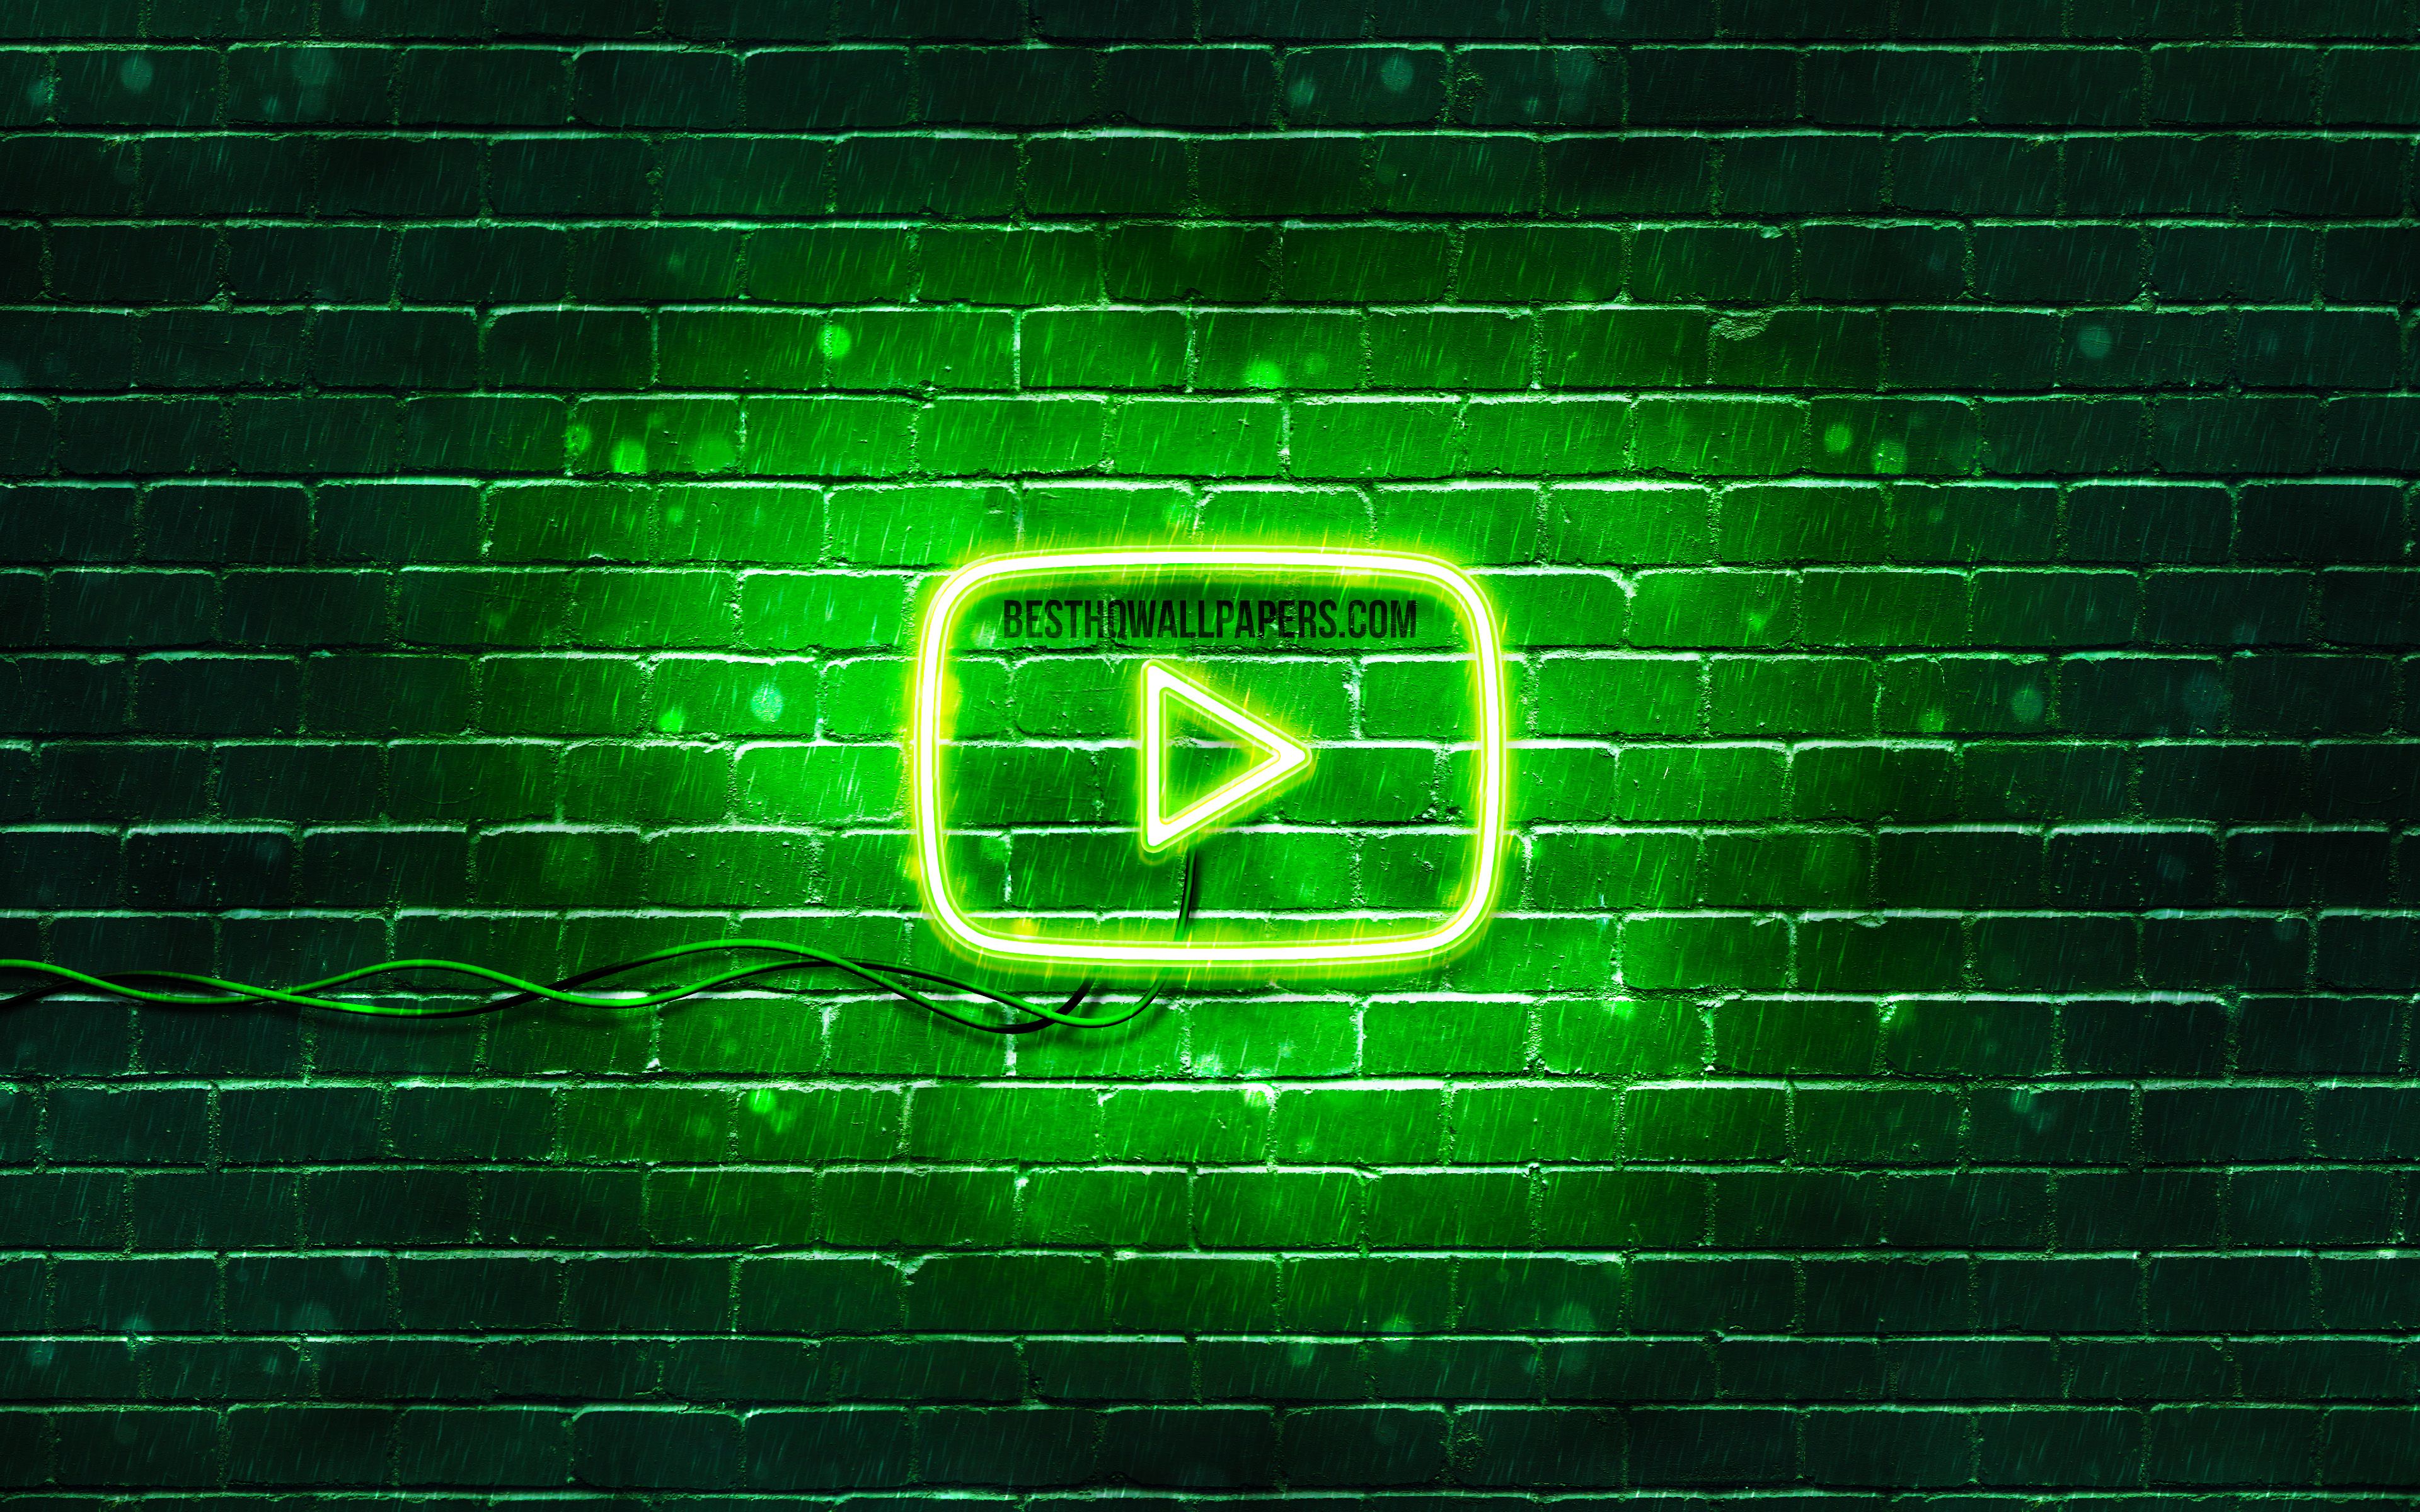 Download wallpaper Youtube green logo, 4k, green brickwall, Youtube logo, brands, Youtube neon logo, Youtube for desktop with resolution 3840x2400. High Quality HD picture wallpaper